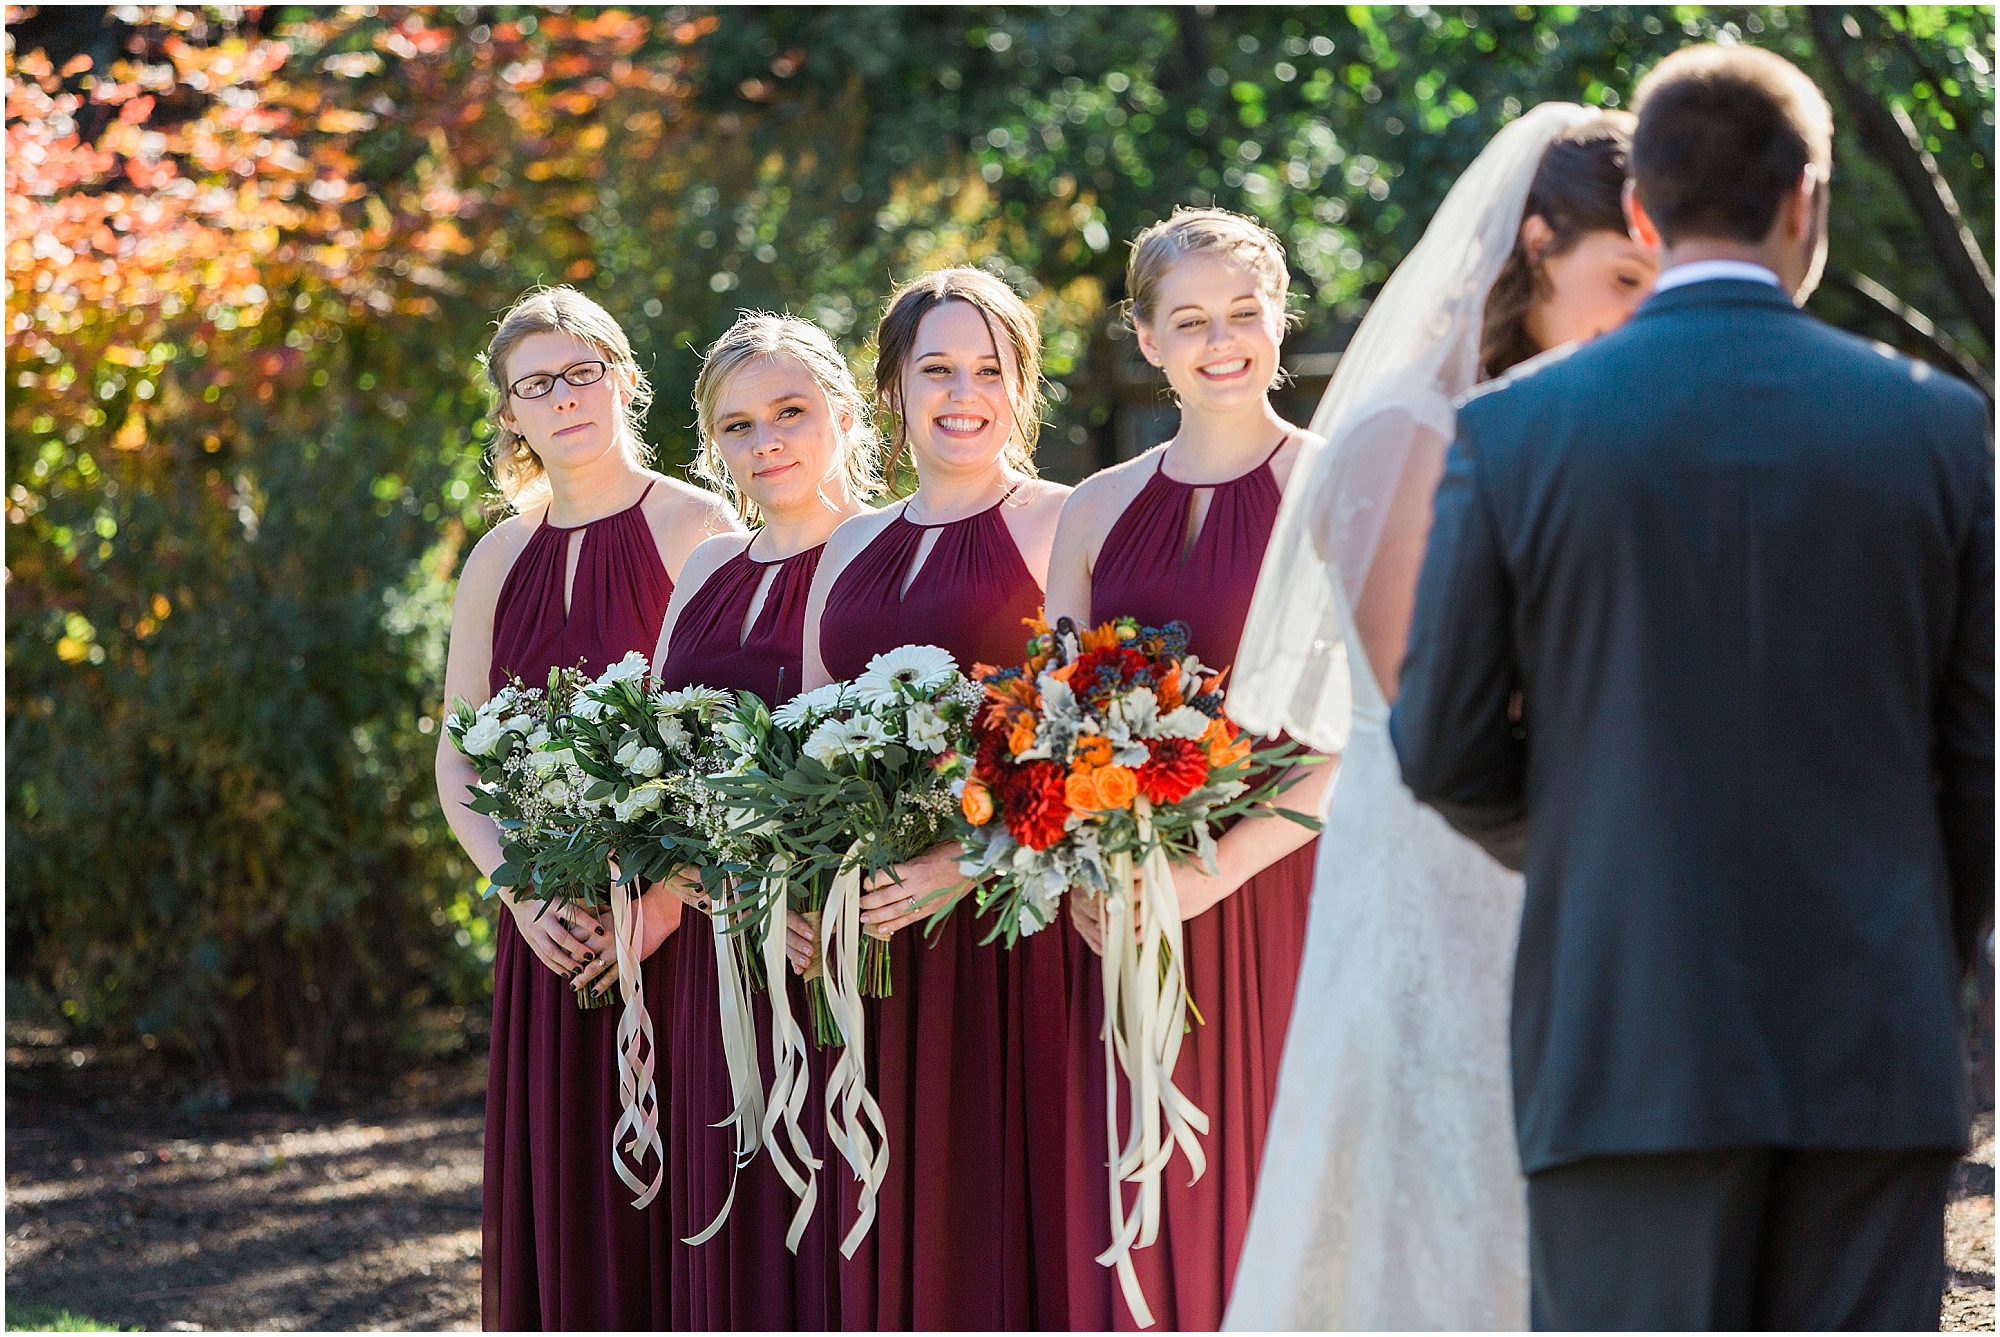 Bridesmaids wearing gorgeous maroon Bill Levkoff gowns look on as the happy couple exchances their vows at their outdoor fall wedding in Bend, OR. | Erica Swantek Photography